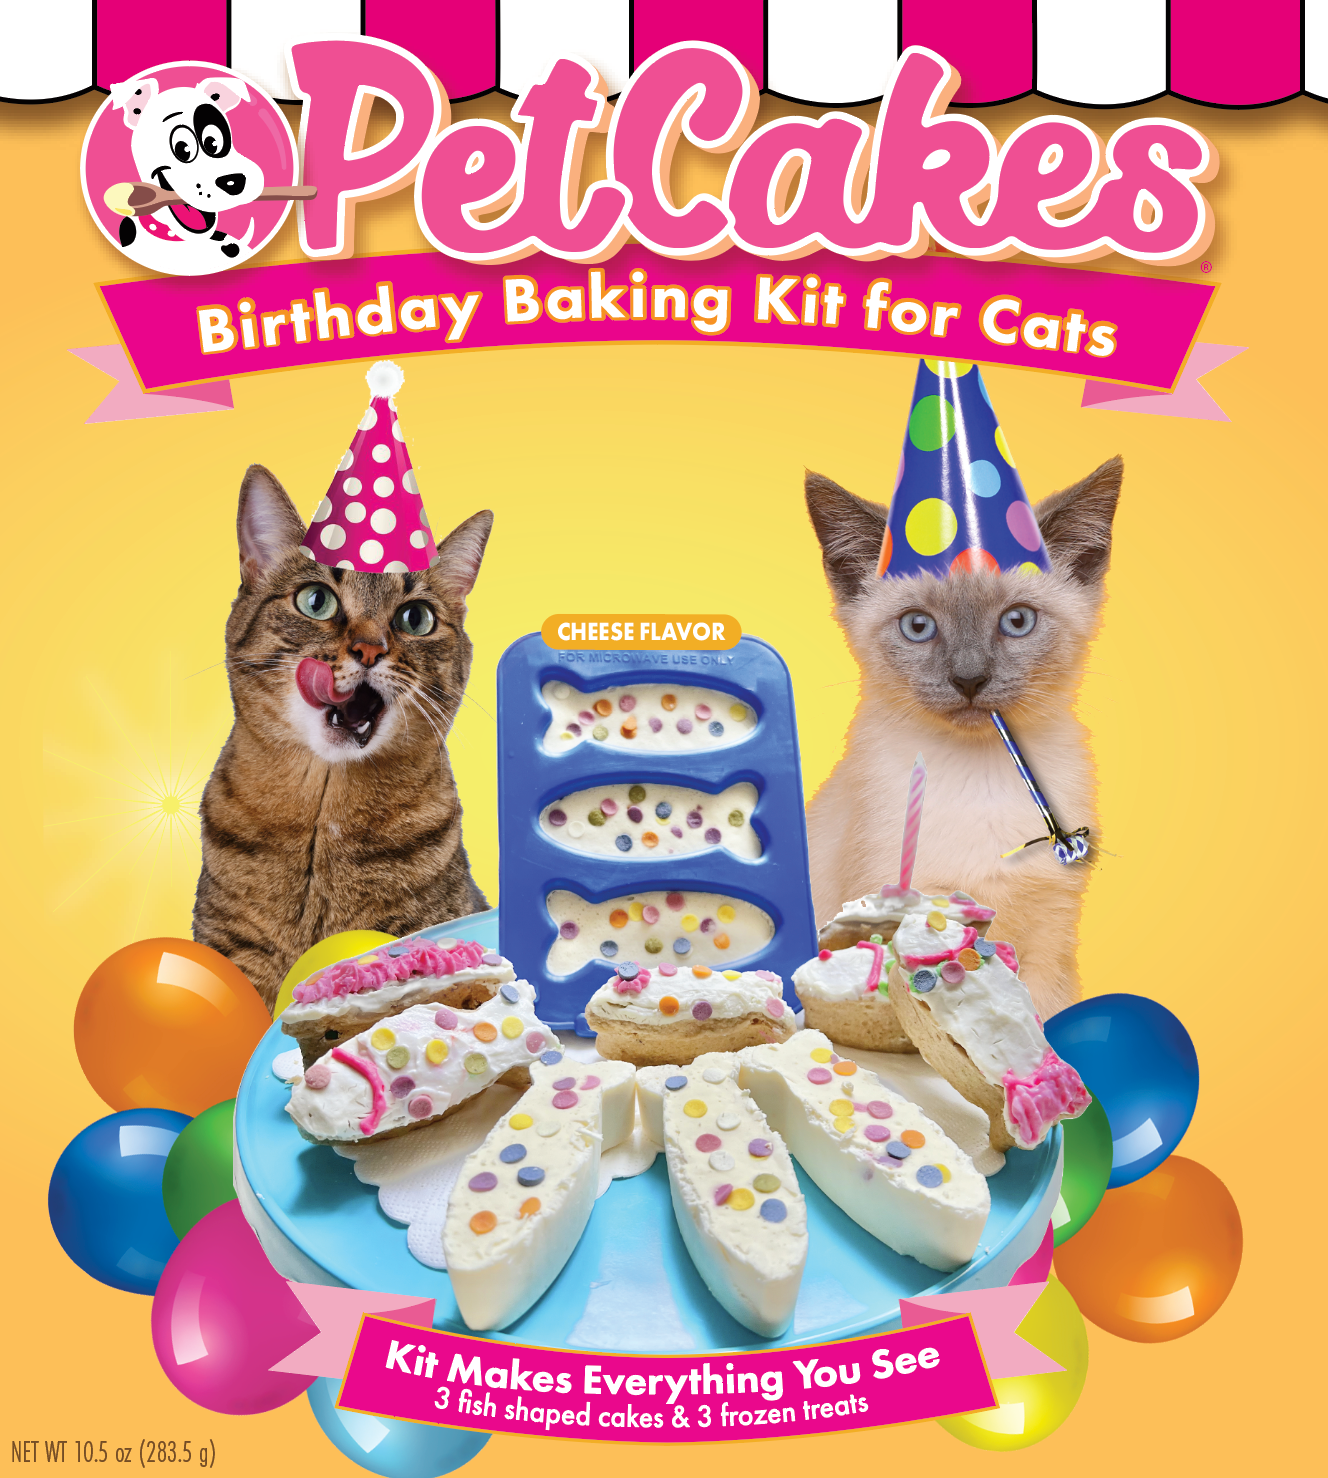 Birthday Baking Kit for Cats - 6 Cakes + 6 Ice Cream + Candle & Sprinkles